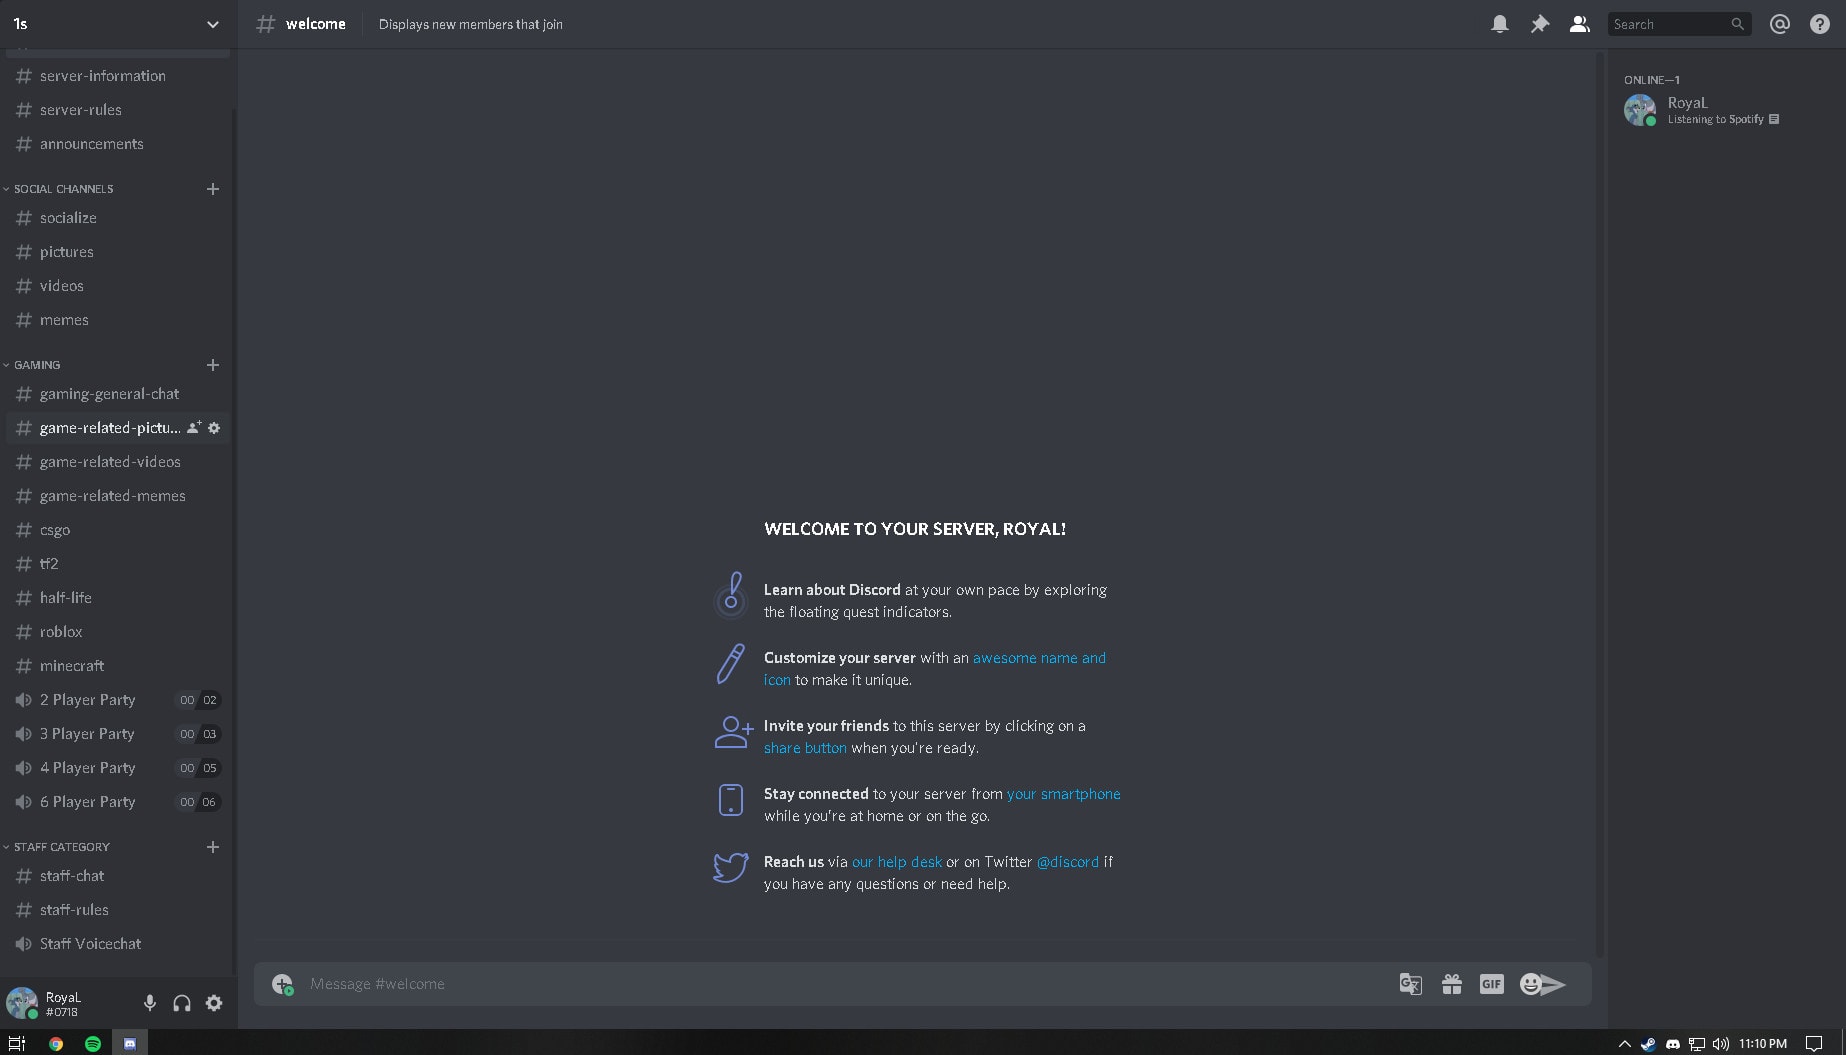 Make You 3 Discord Server For Only 5 Euros By Andreiionut360 Fiverr - roblox csgo discord